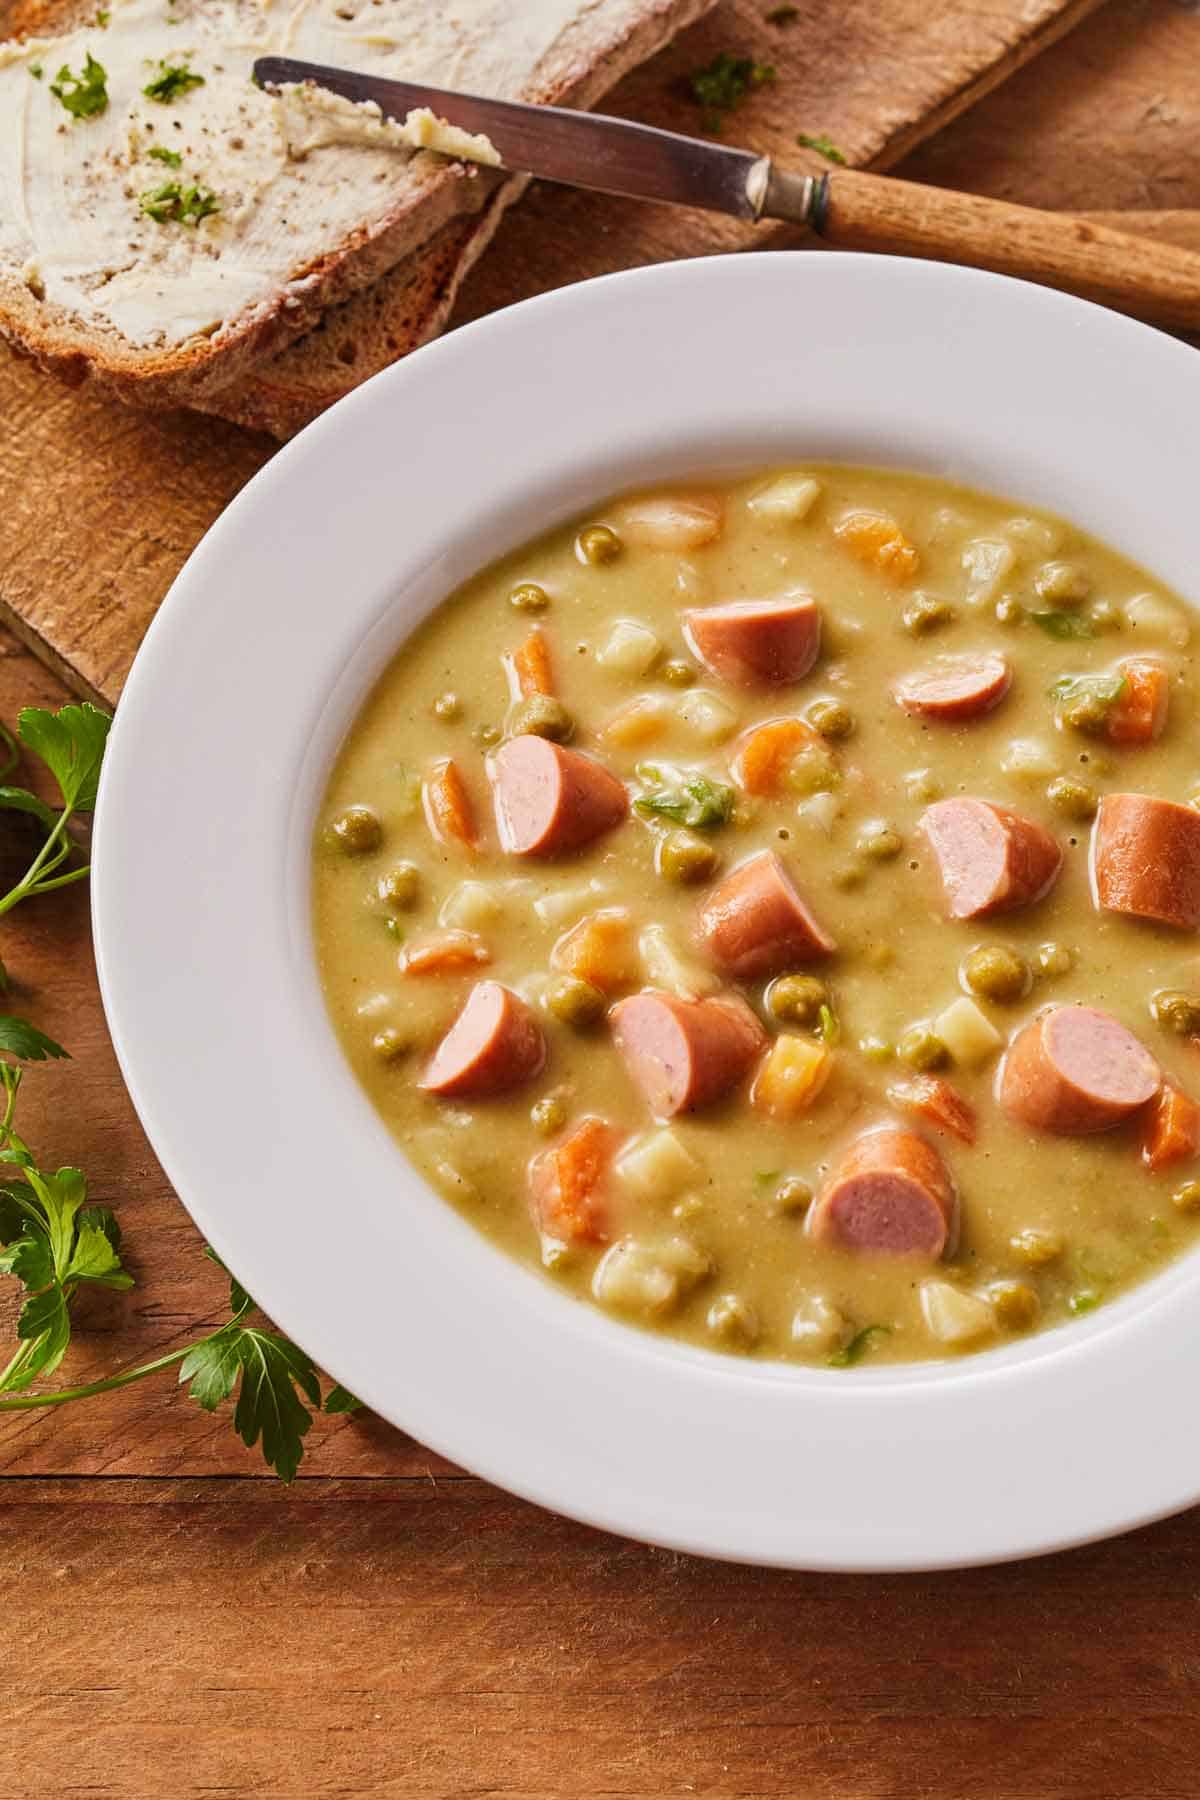 Bowl of split pea soup with sausage and a side of bread and butter on a plate.